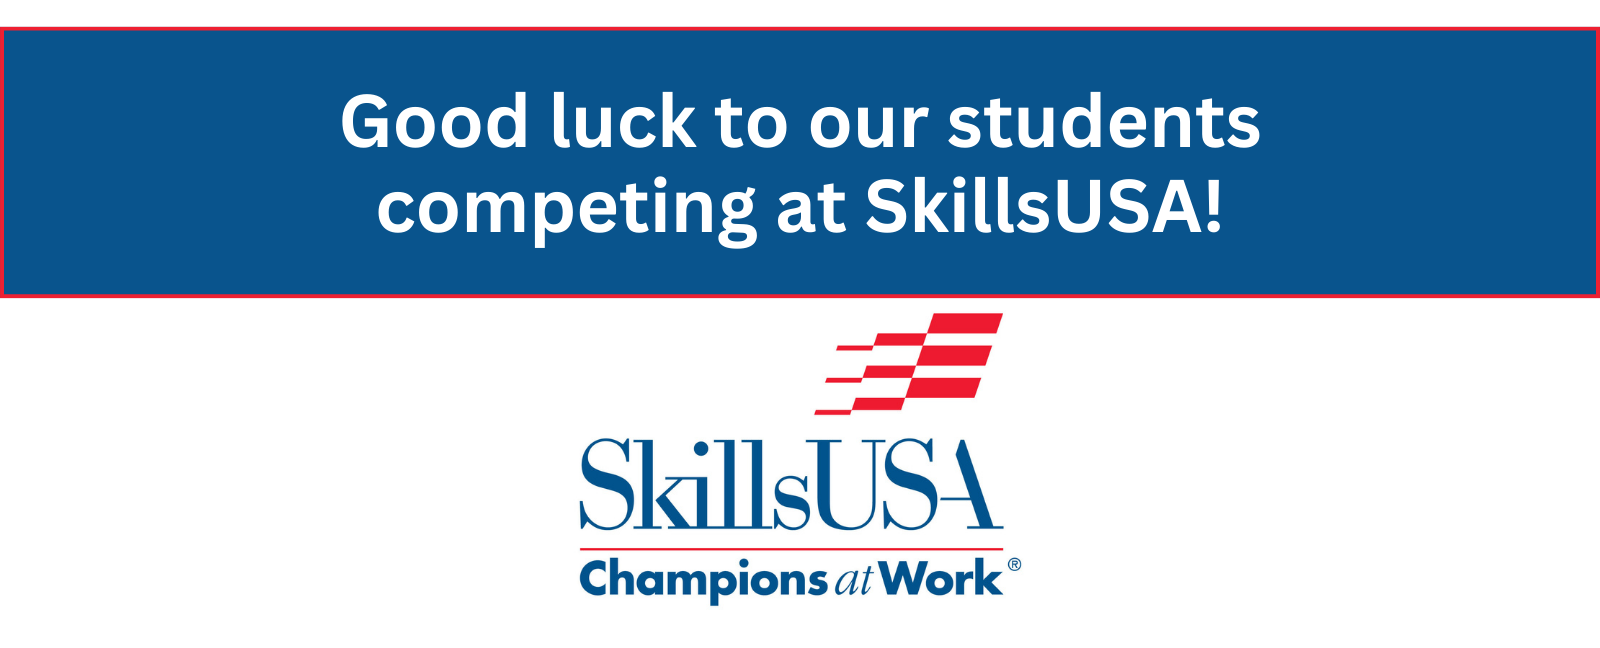 Good luck to our students competing at SkillsUSA!